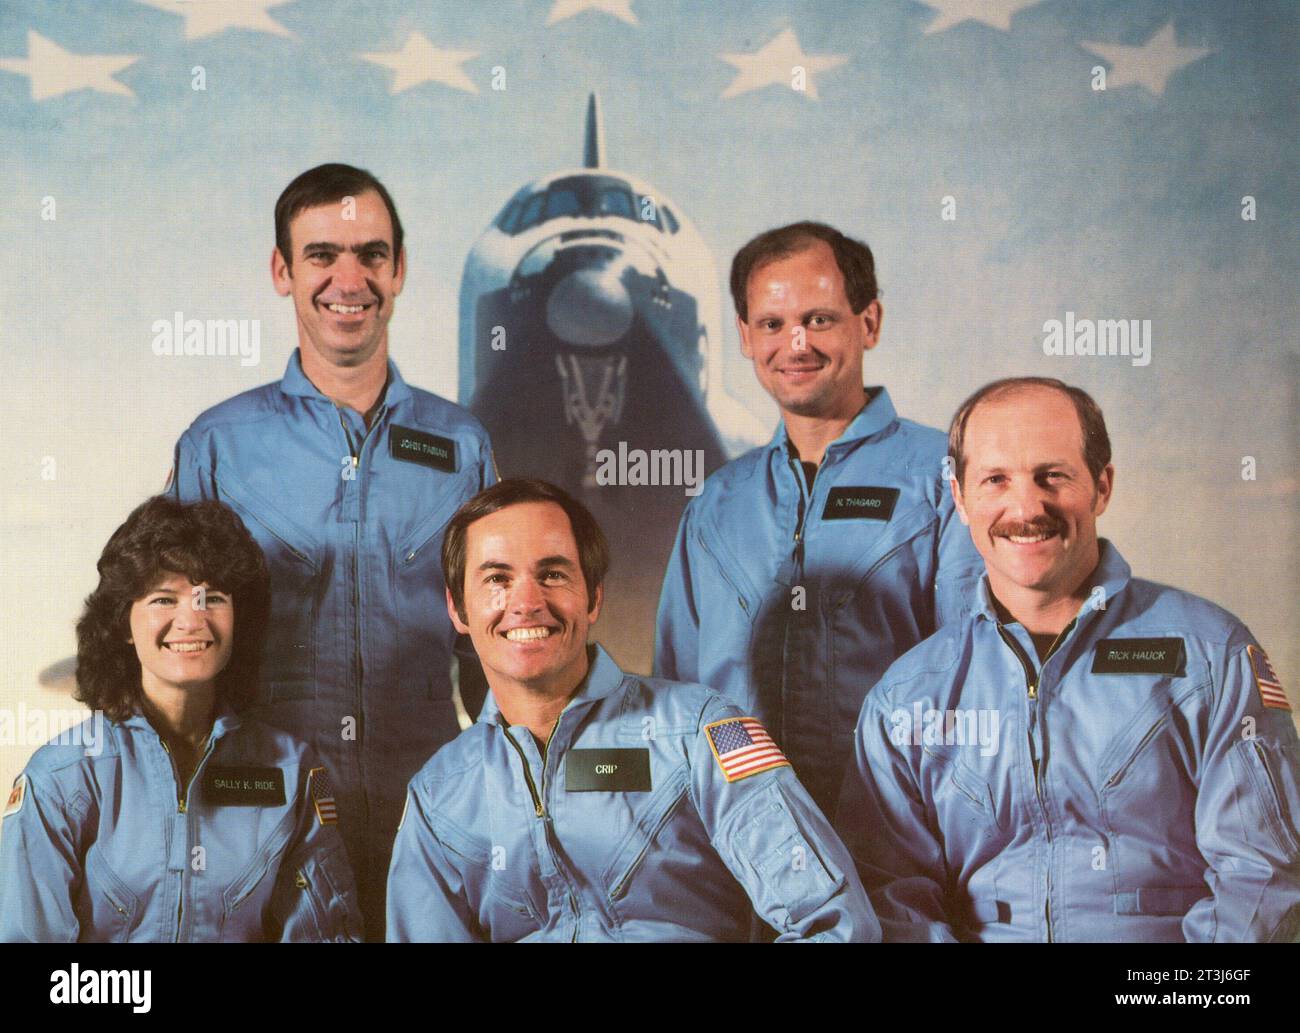 Astronauts of the STS-7/Challenger mission are left to right first row: Sally K. Ride (mission specialist), Robert L. Crippen (commander), Frederick H. Hauck (pilot); rear row: John M. Fabian (left) and Norman E. Thagard (mission specialists). STS-7 launched the first five-member crew and the first American female astronaut into space on June 18, 1983. STS-7 Astronauts, 1983 Astronauts of the STS-7/Challenger mission are left to right first row: Sally K. Ride (mission specialist), Robert L. Crippen (commander), Frederick H. Hauck (pilot); rear row: John M. Fabian (left) and Norman E. Thagard Stock Photo